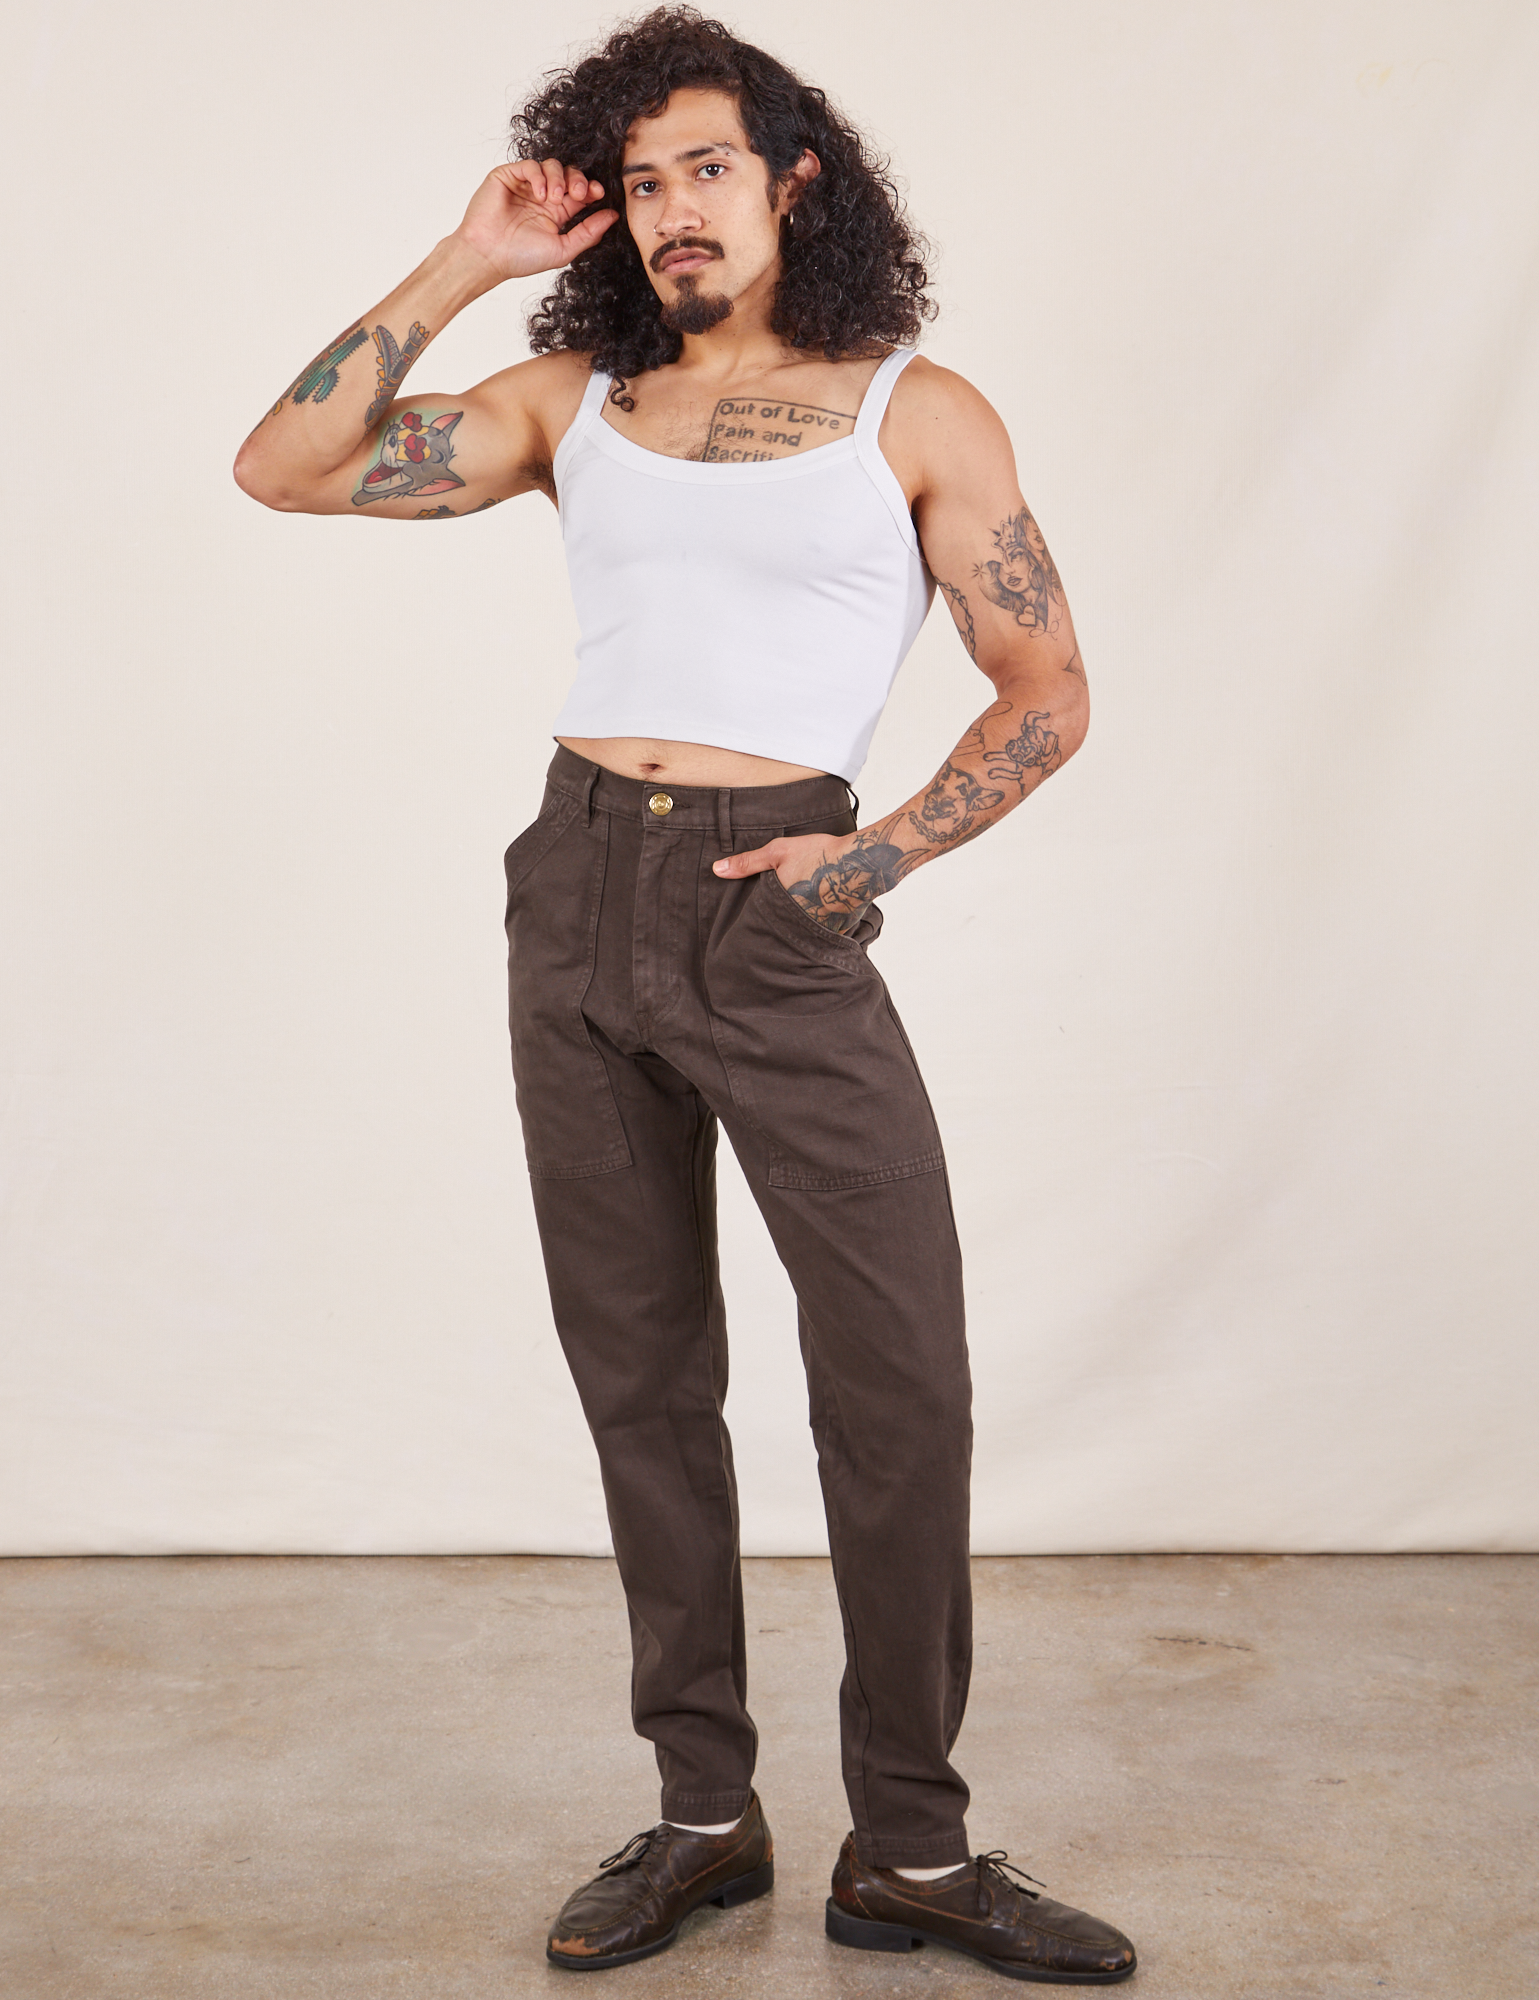 Jesse is 5'8" and wearing XS Pencil Pants in Espresso Brown paired with Cropped Cami in vintage tee off-white